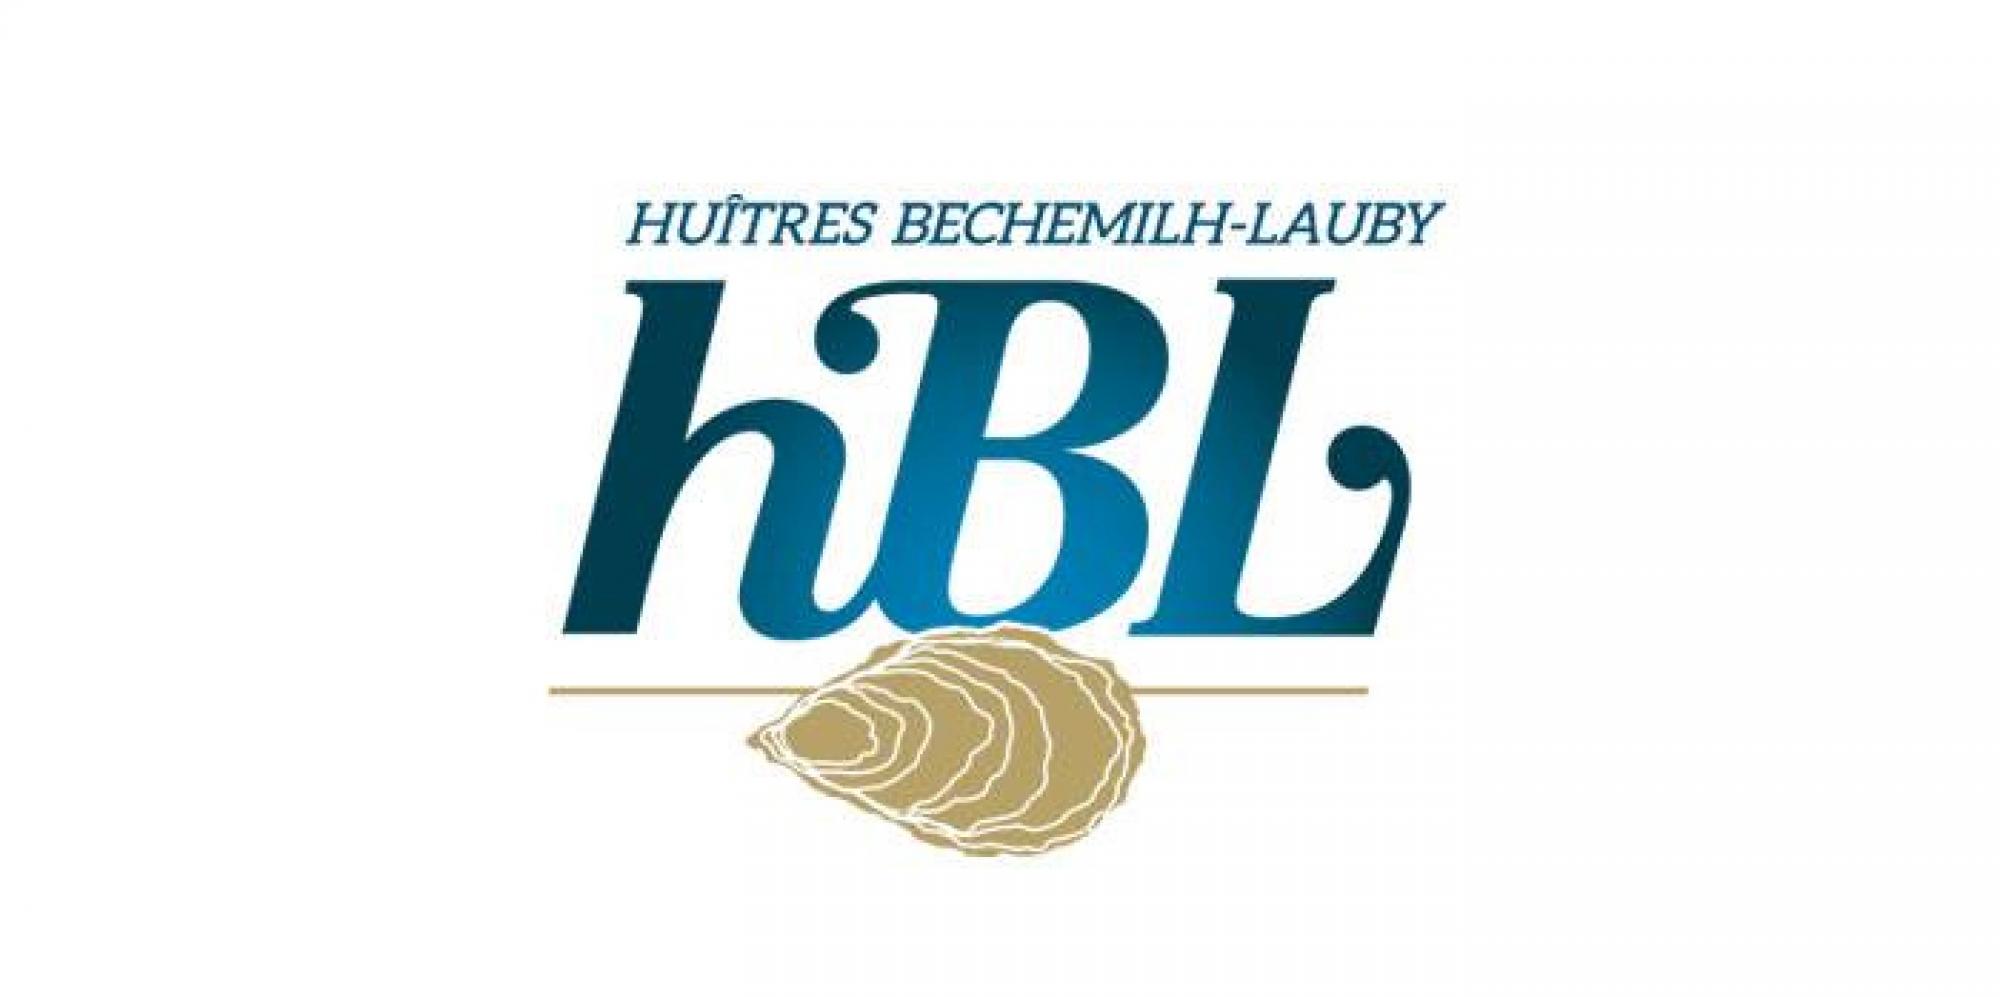 HUITRES BECHEMILH LAUBY 